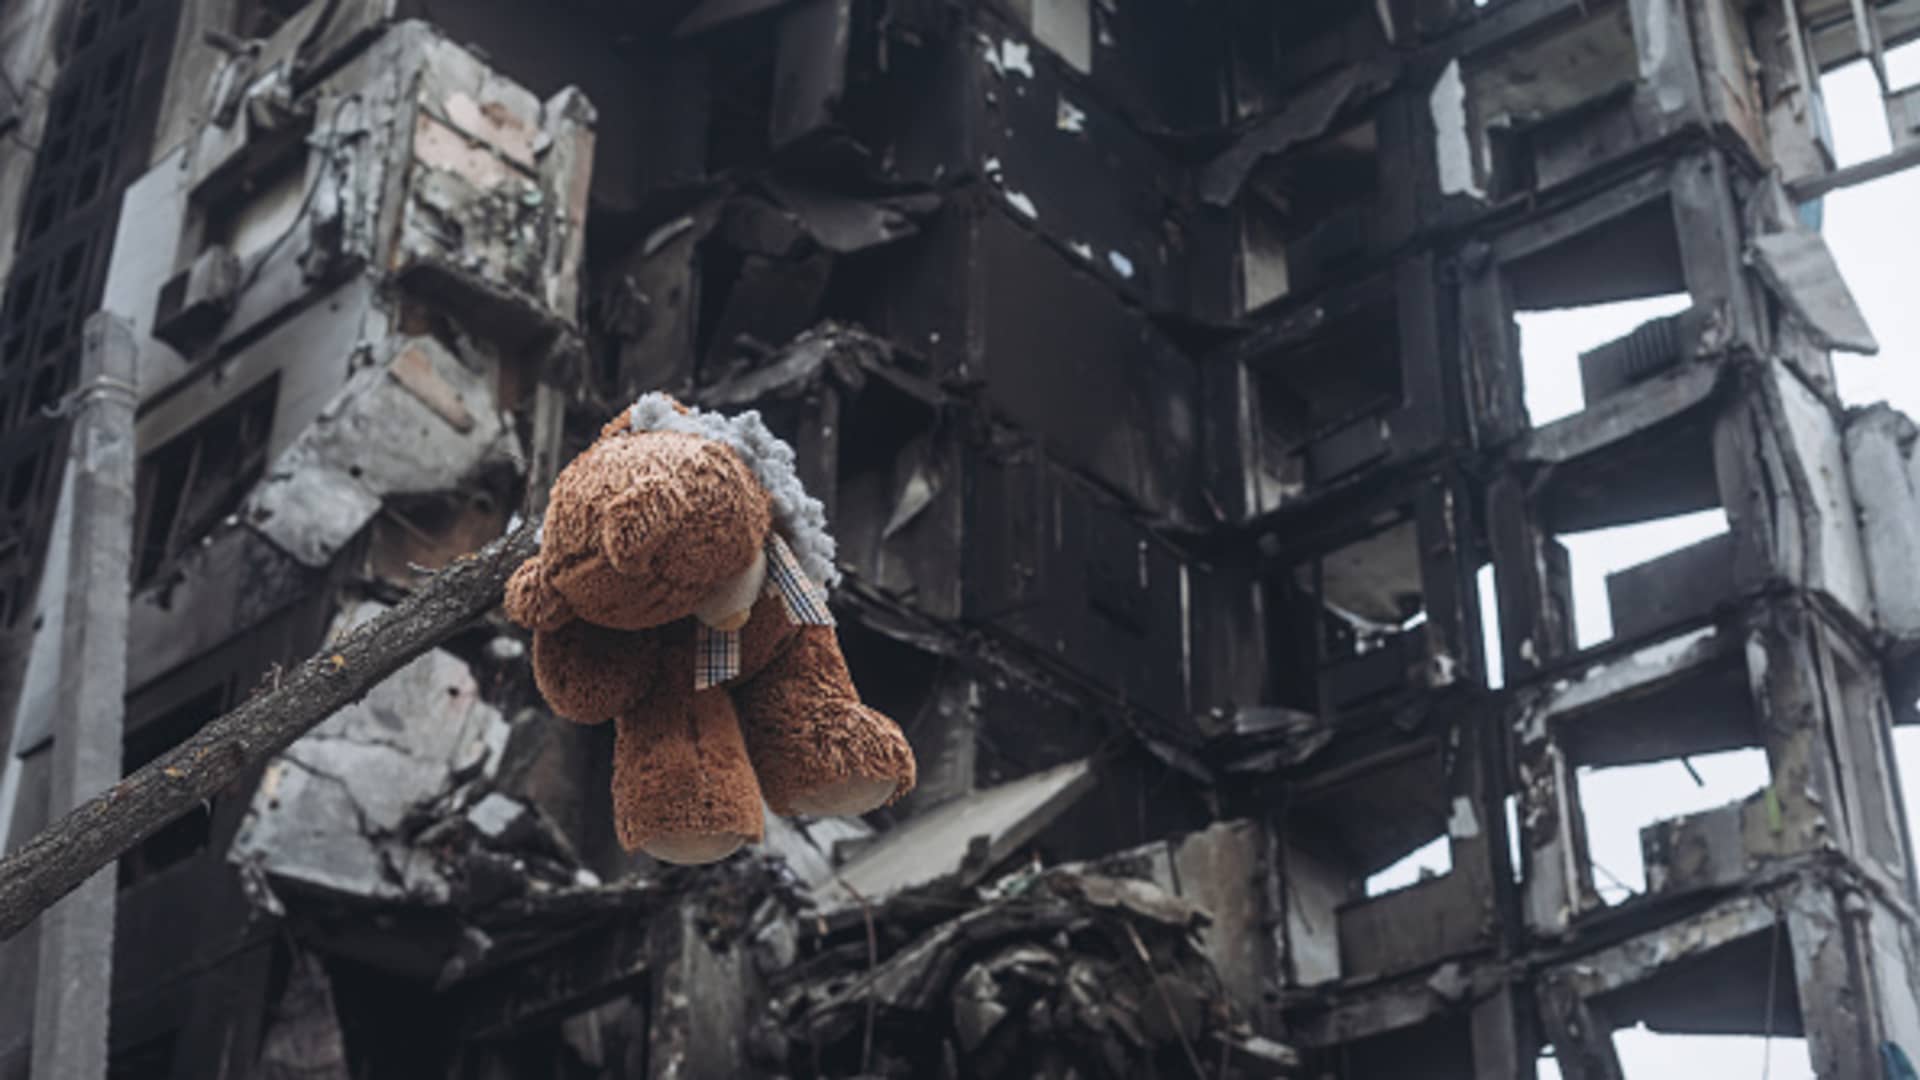 Borodyanka, UKRAINE - APRIL 6: A teddy bear hanging from a tree in front of a building bombed by the Russian army in Borodyanka (Ukraine), 6 April 2022.